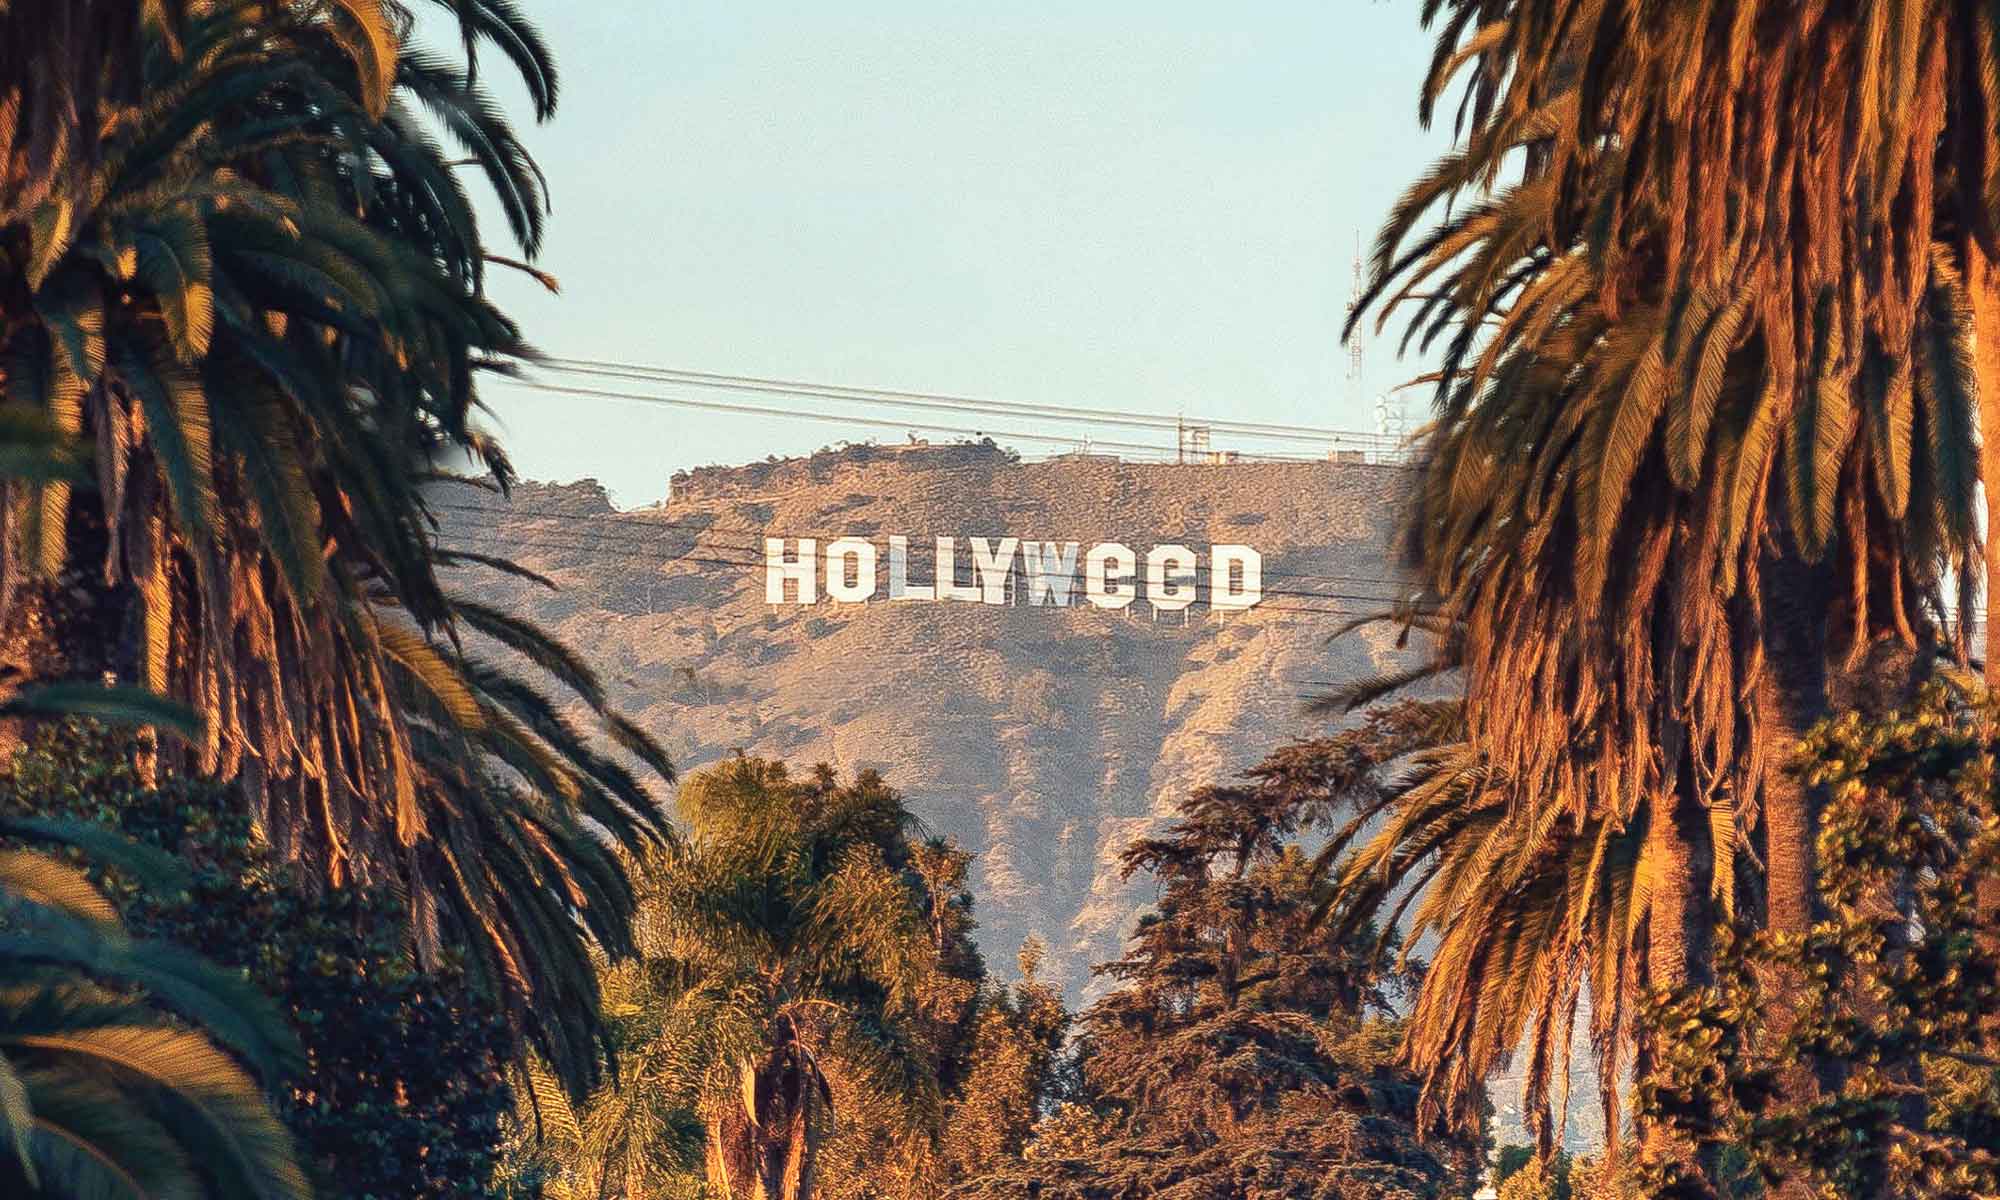 Hollyweed Sign Los Angeles